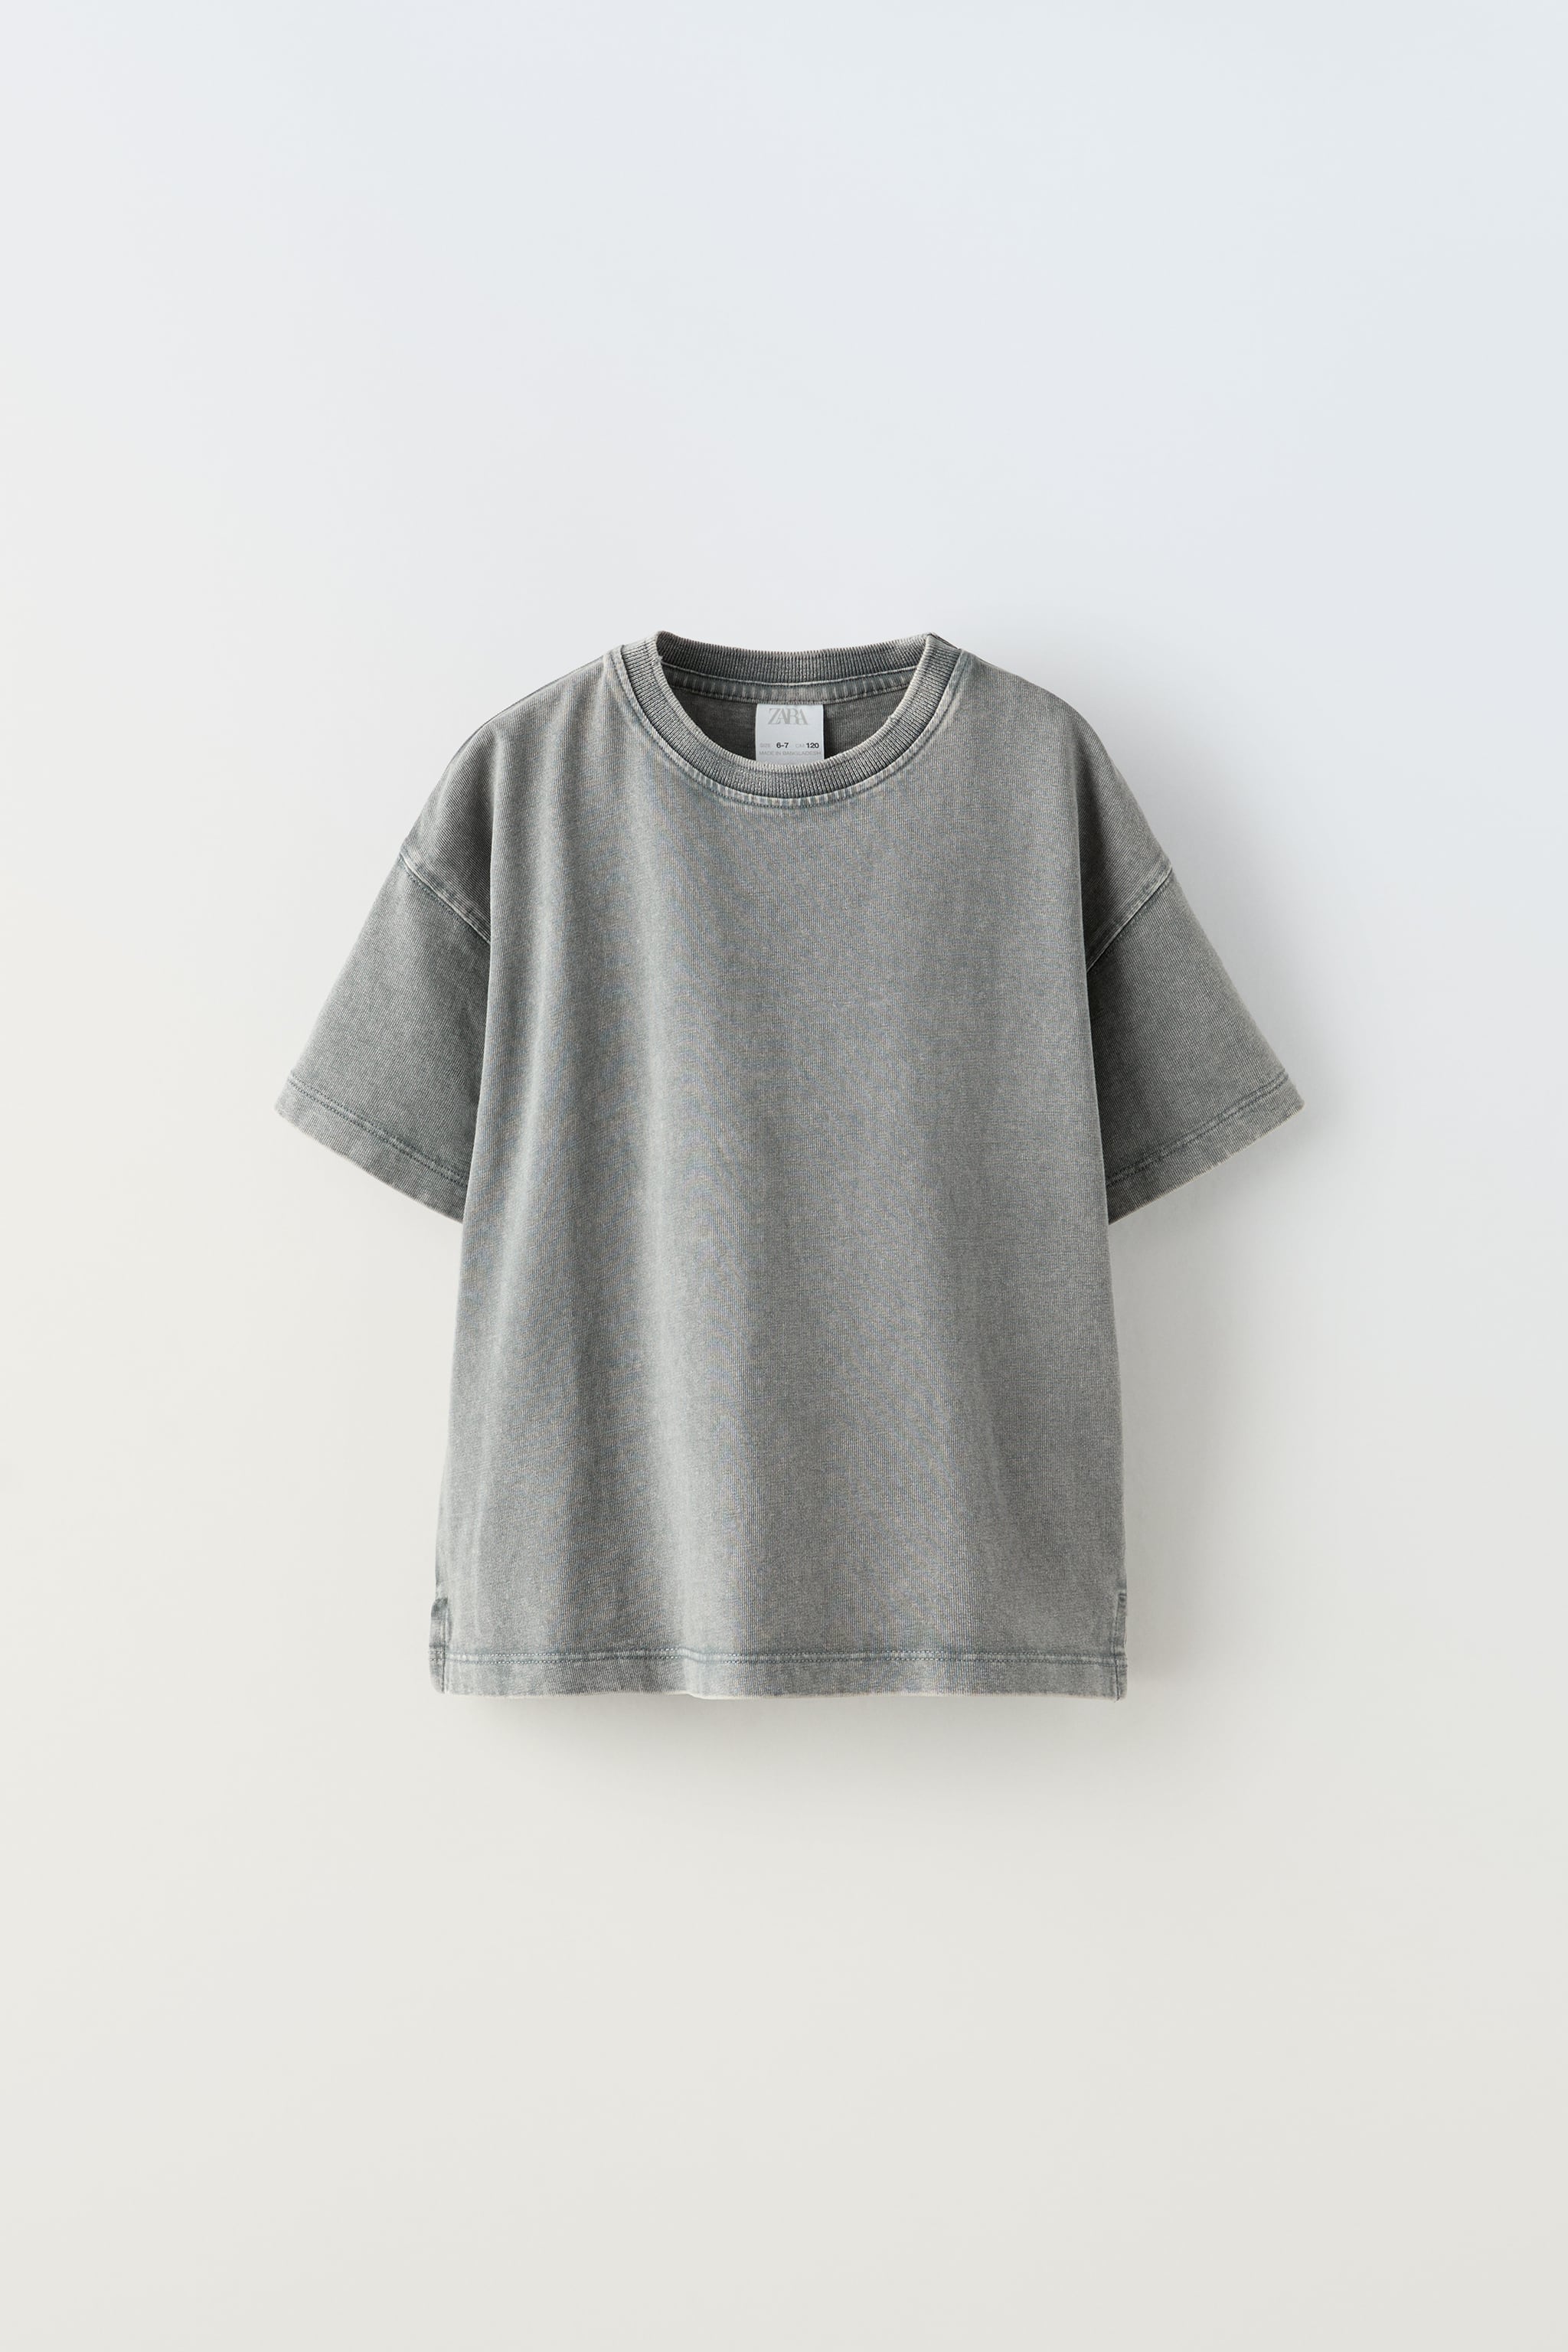 WASHED EFFECT HEAVY WEIGHT T-SHIRT